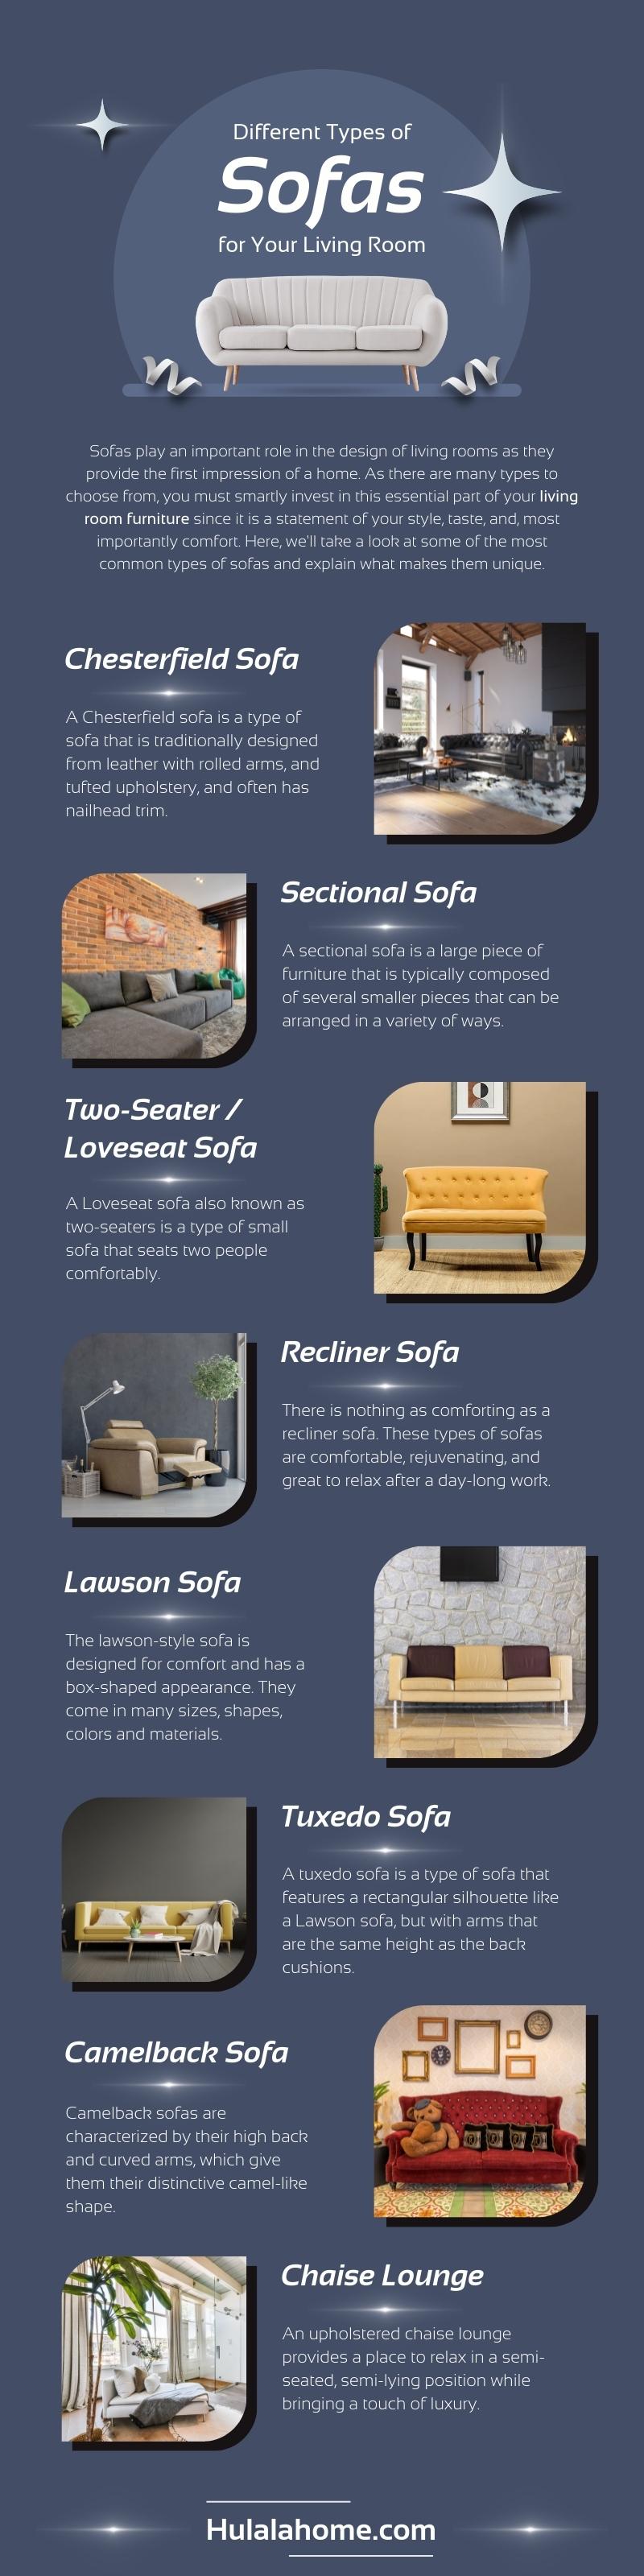 Different Types of Sofas for Your Living Room